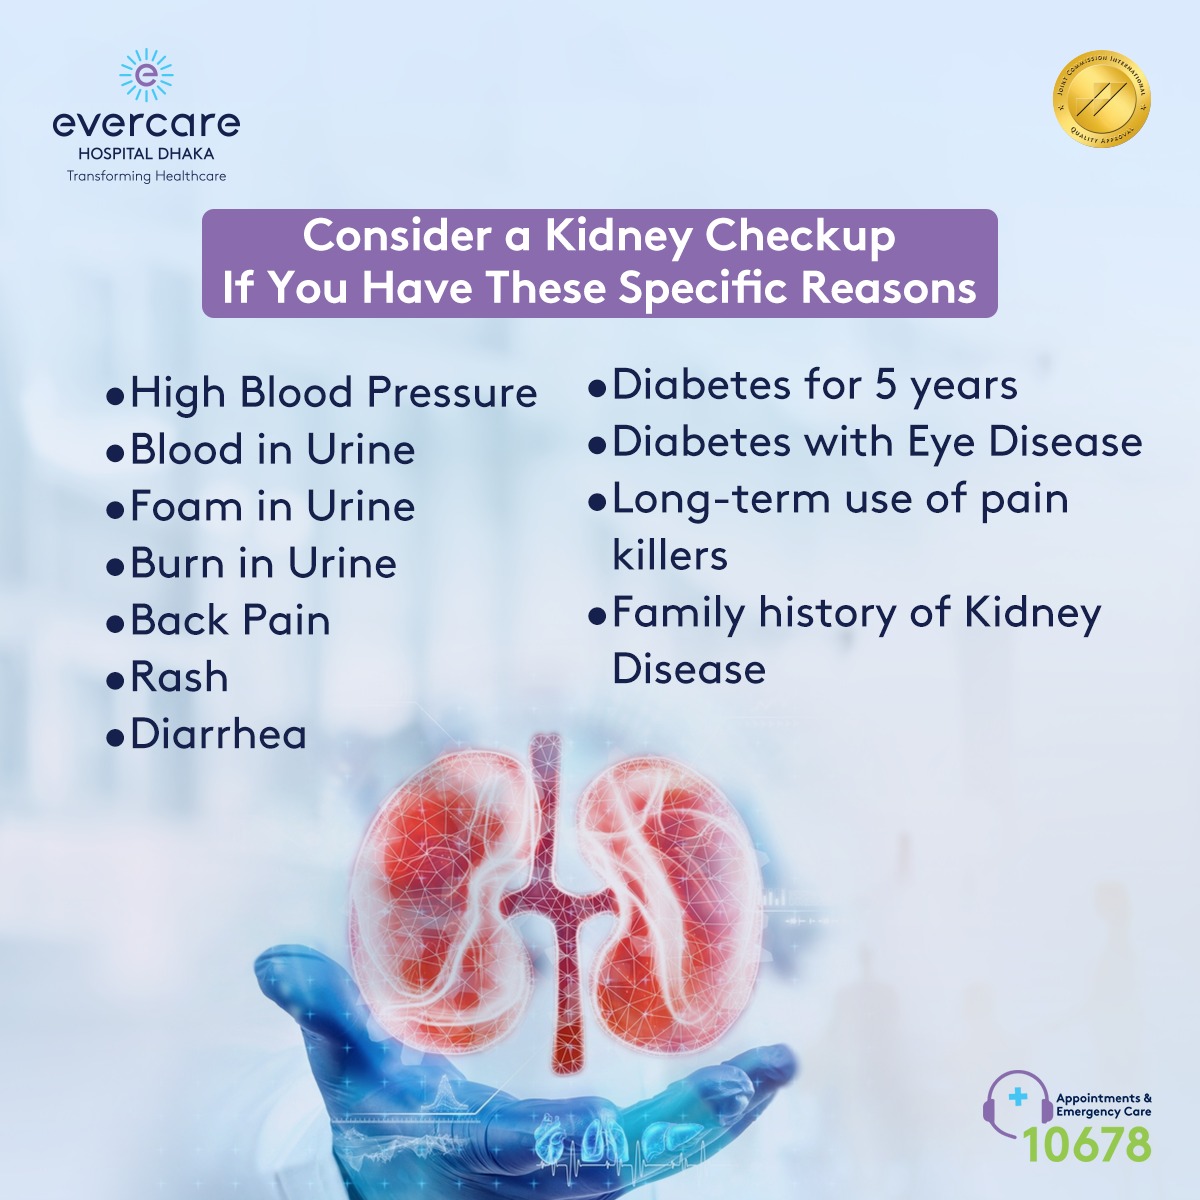 Prioritize your kidney health through regular checkups, ensuring that everything is functioning well. Your health is a top priority!
For appointment please call 10678 or visit evercarebd.com/dhaka/speciali…

#ShowYourKidneys #KidneyHealthforAll #KidneyHealth #EvercareHospitaldhaka